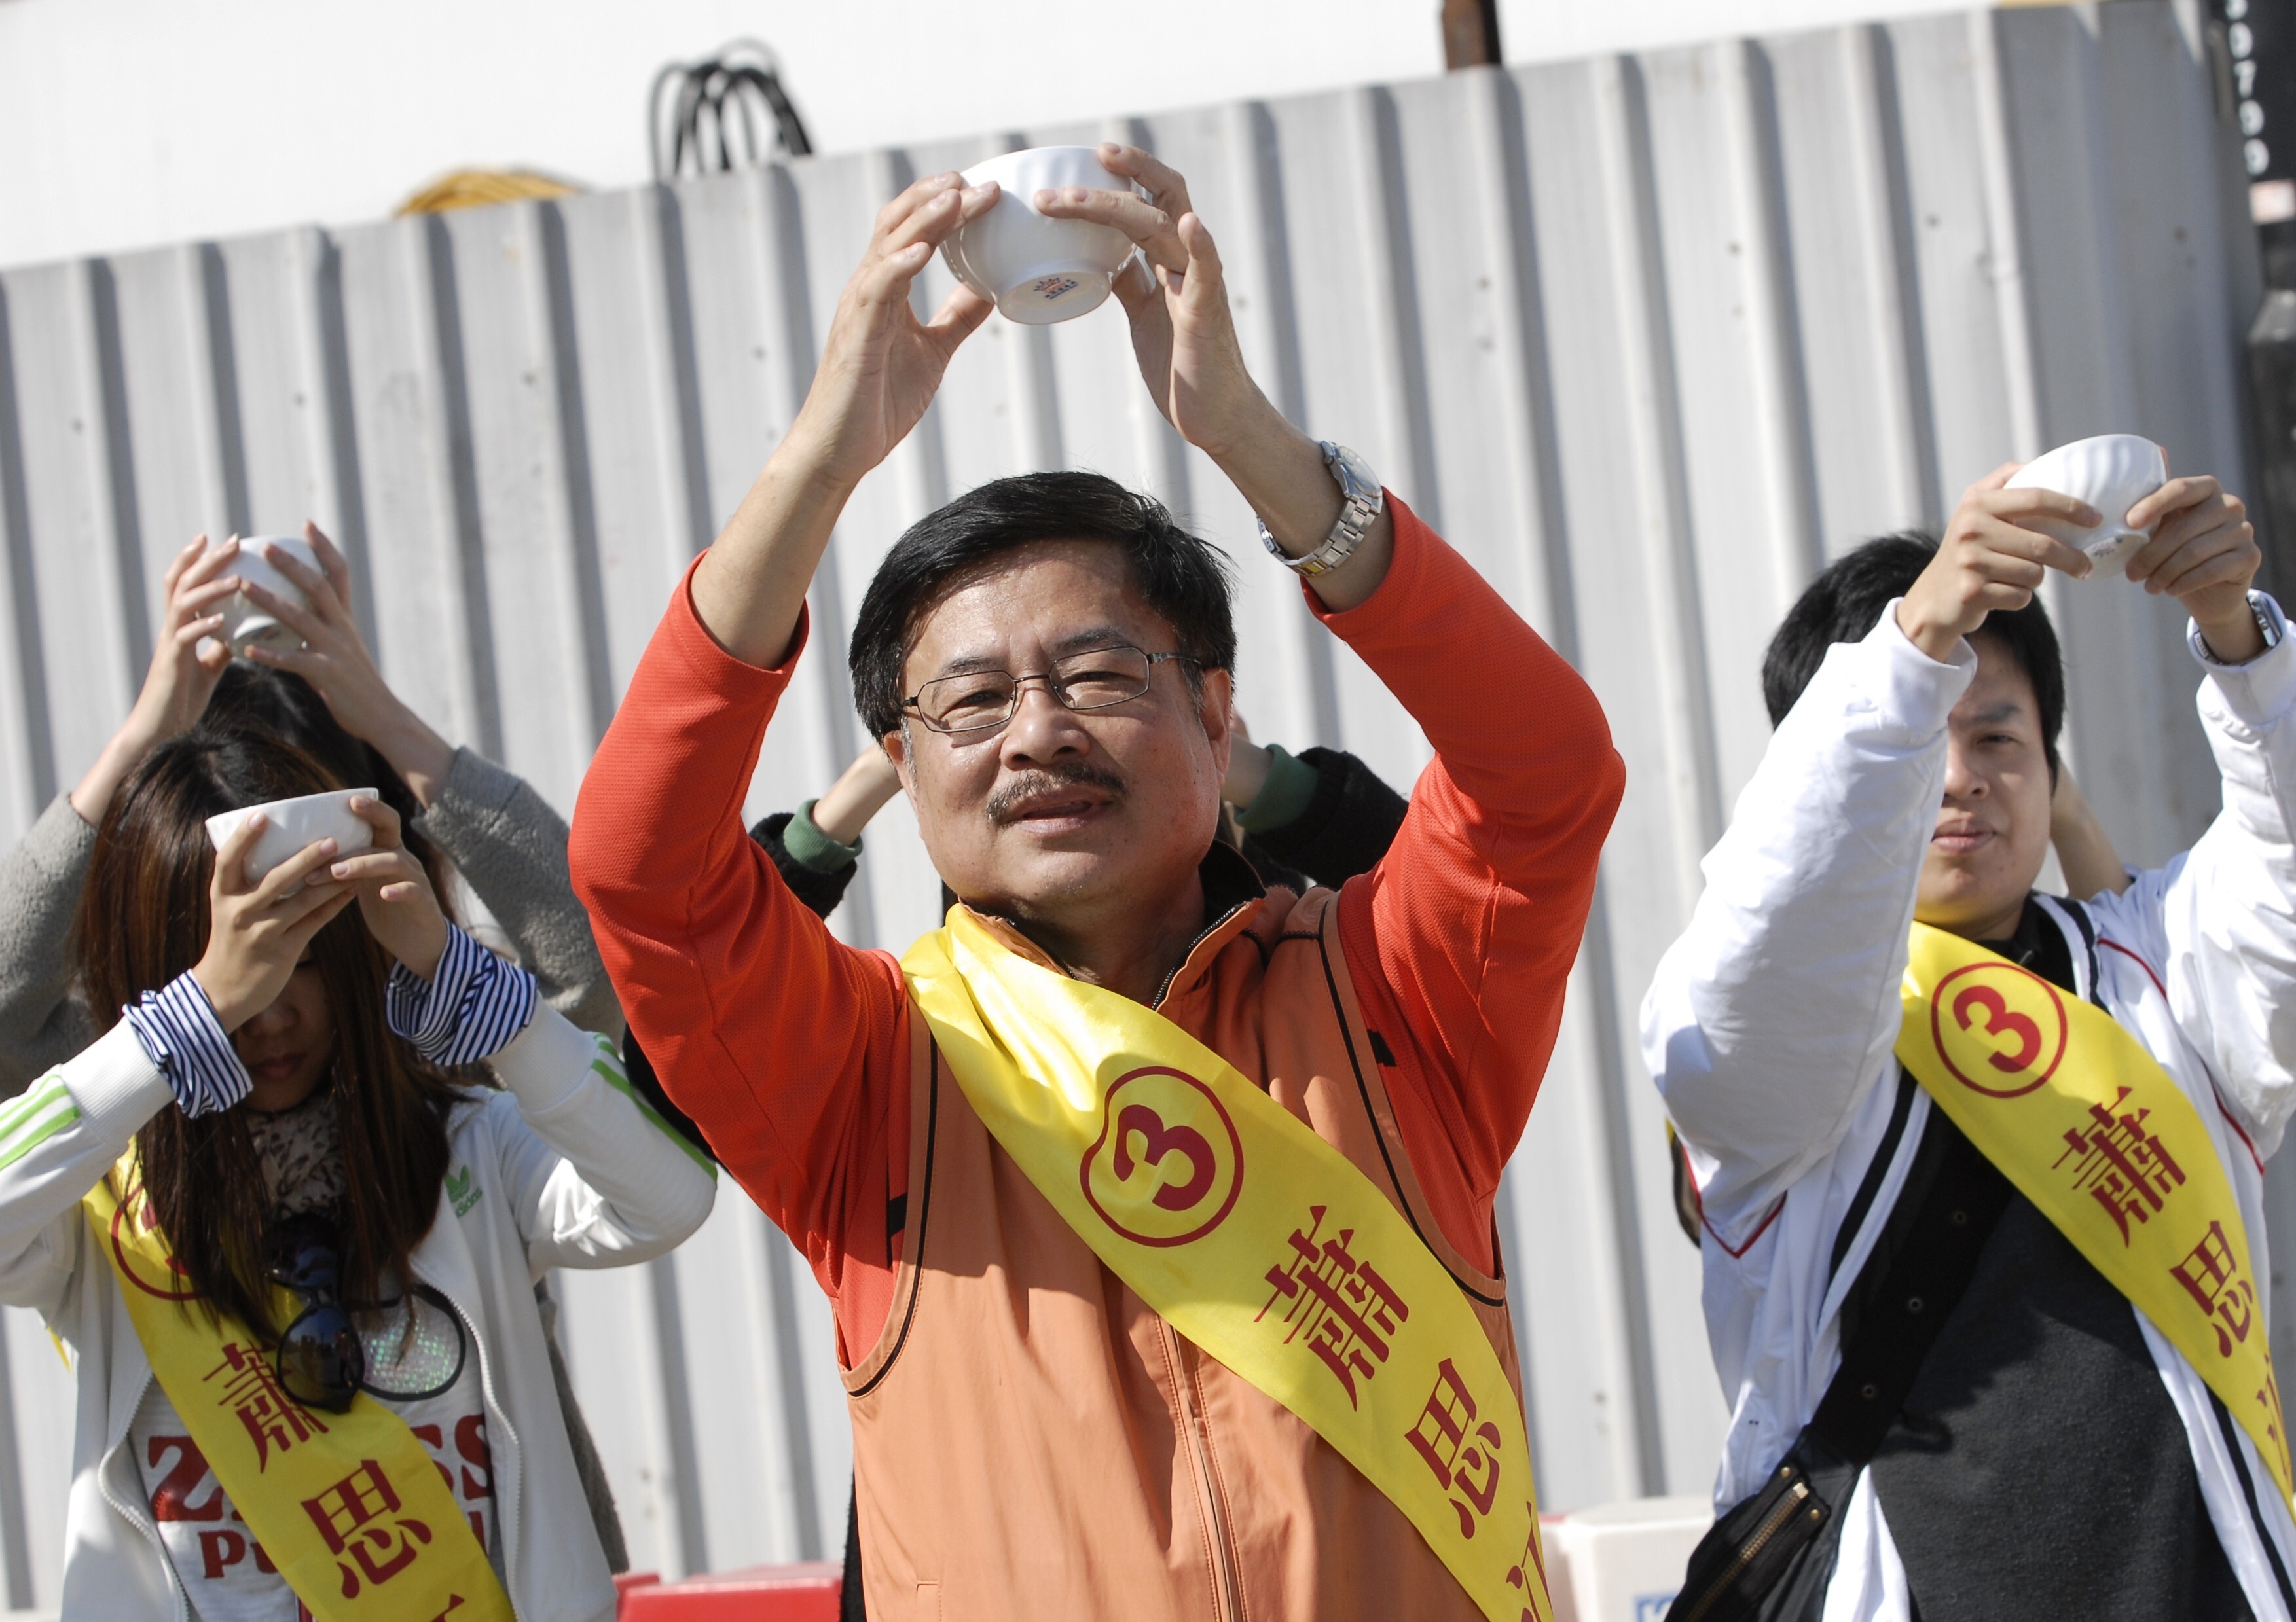 Siu See-kong is best known for his ‘rice dance' during his Legco campaign in 2007. Photo: Warton Li